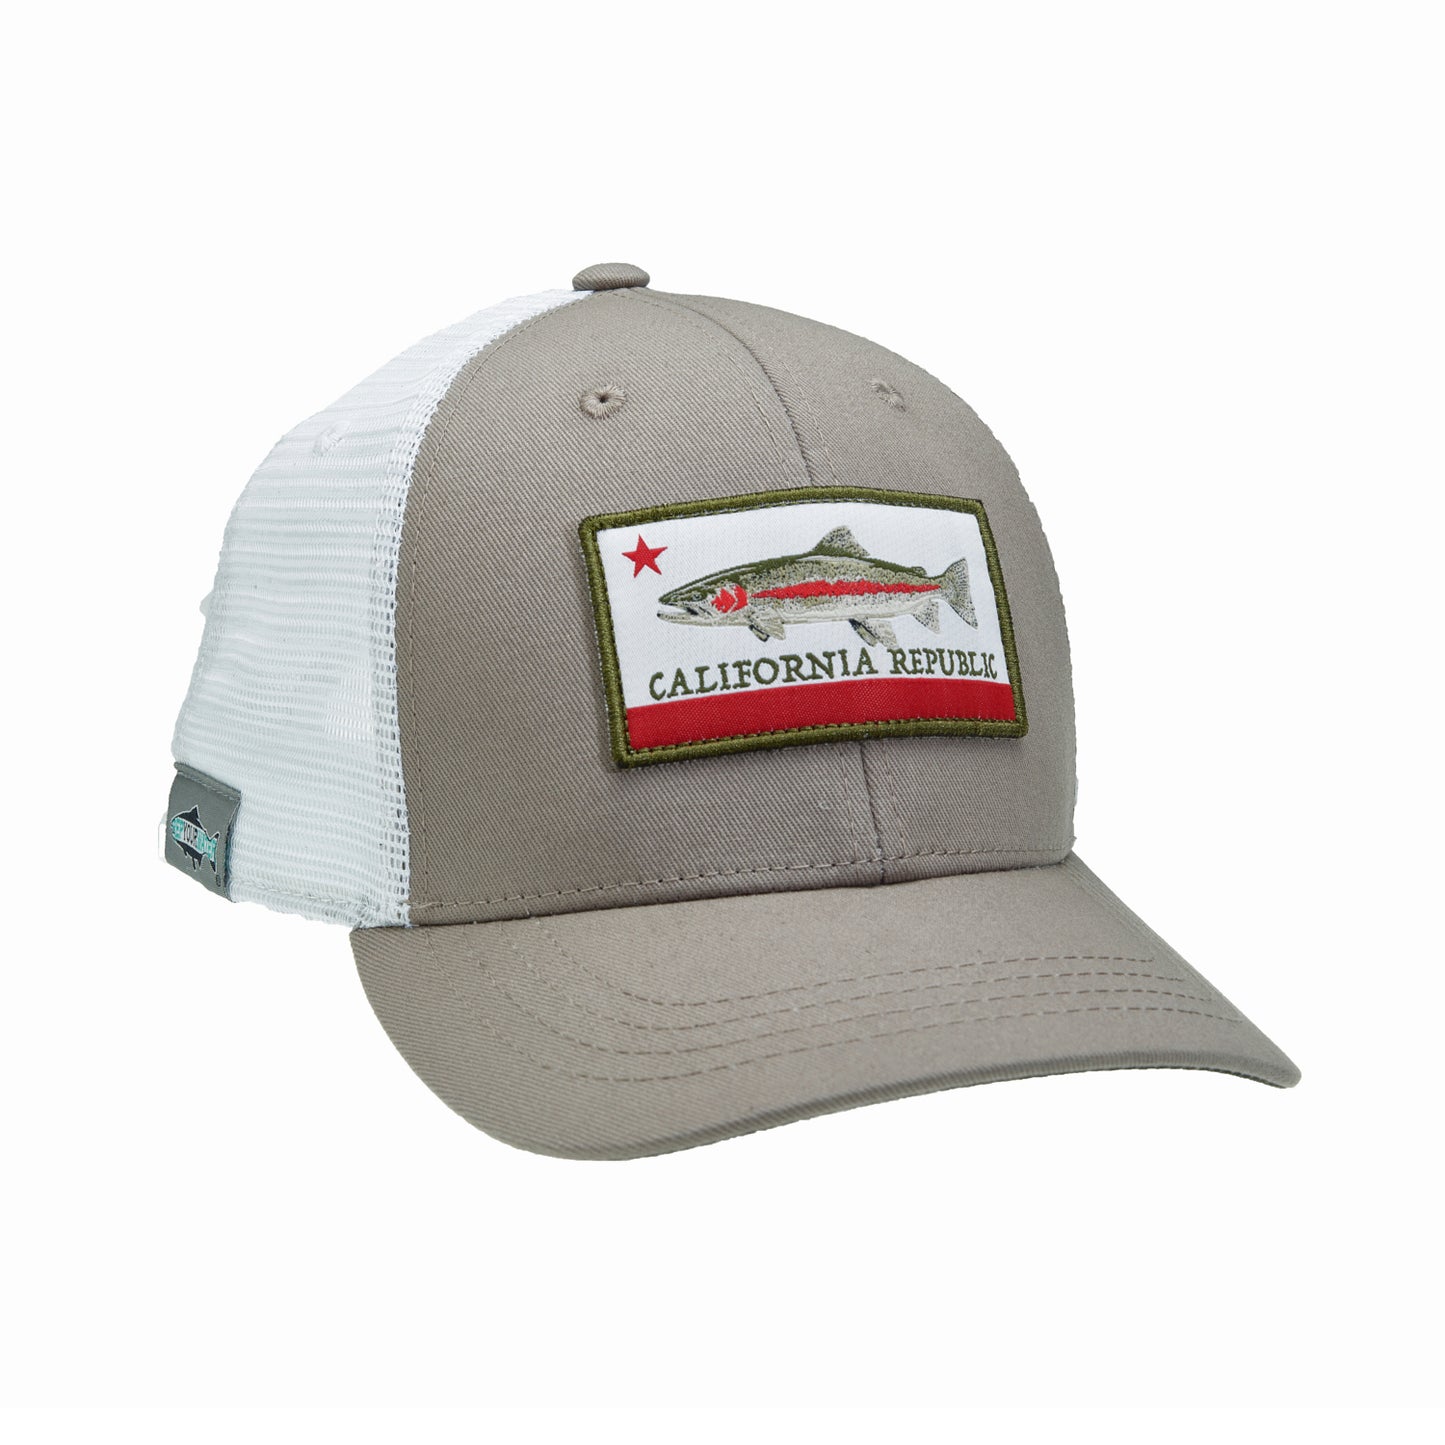 A hat with white mesh on the back and light gray on the front with a rectangular patch on front that has a rainbow trout over the words california republic and a red star above its head